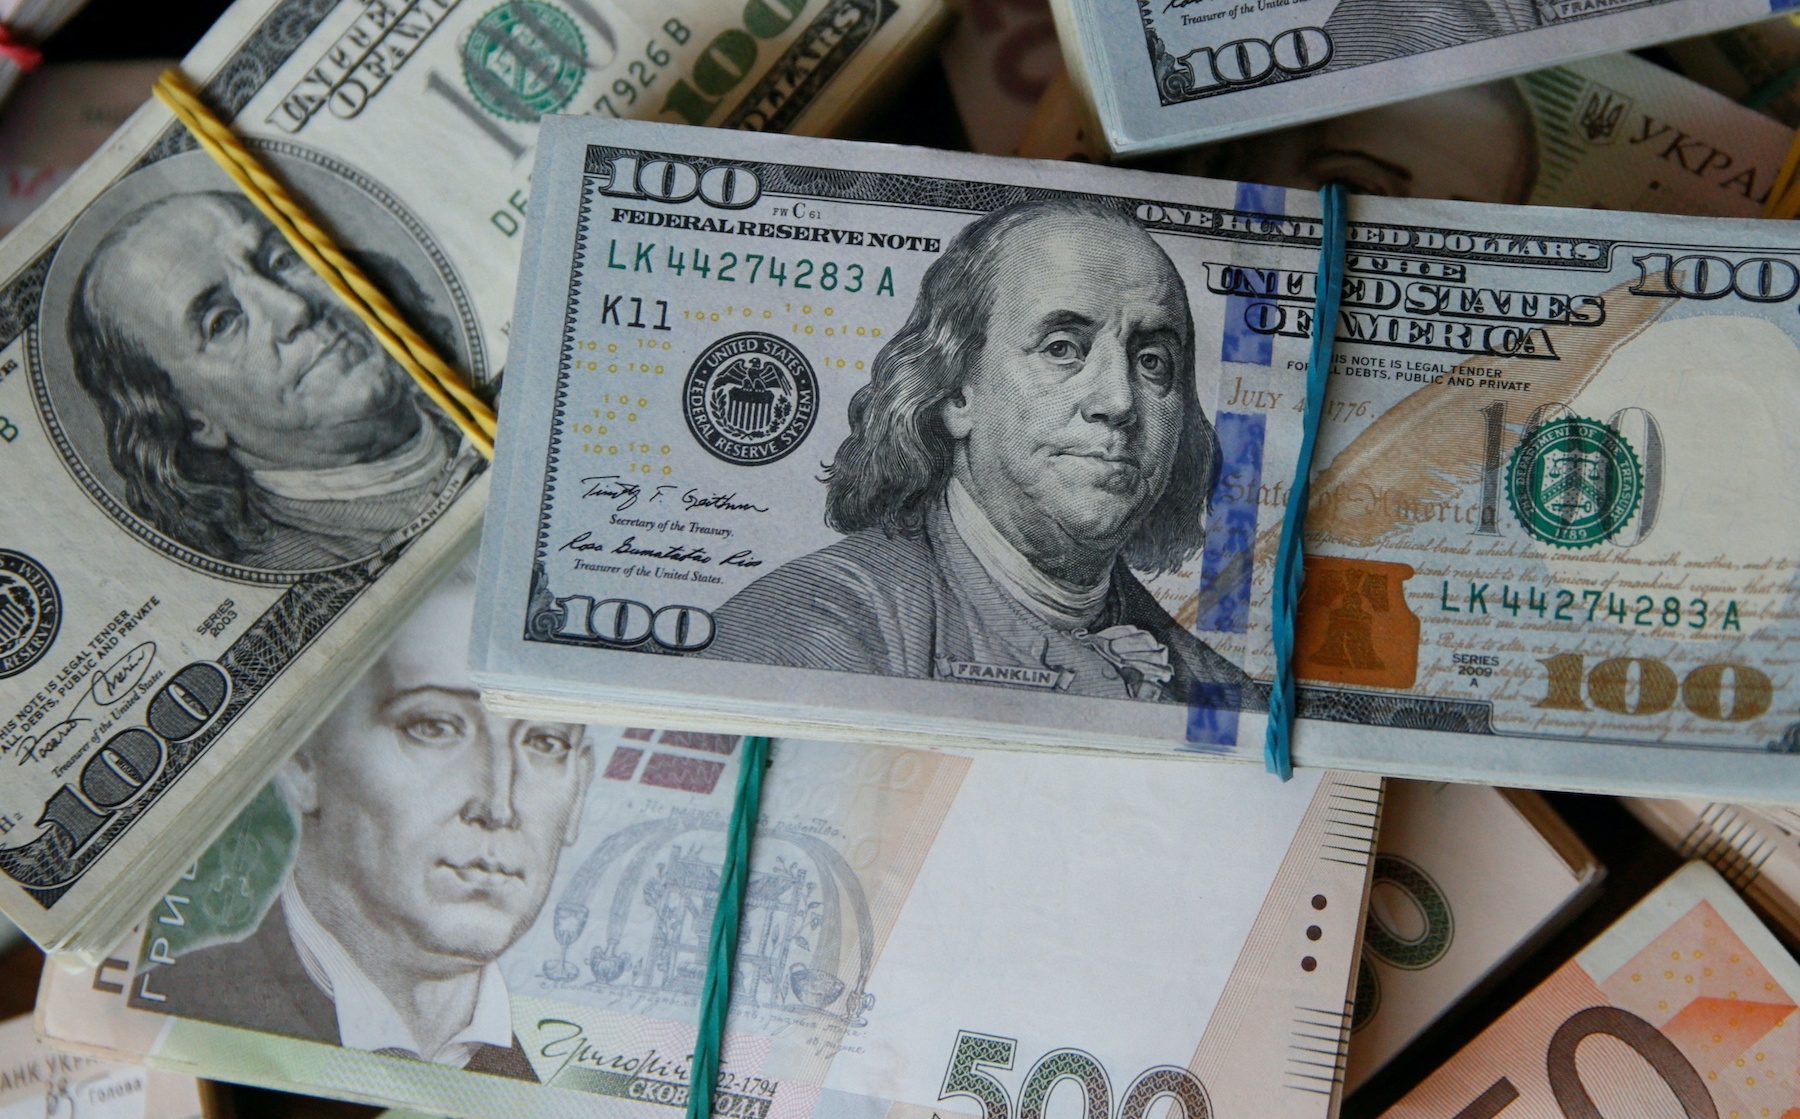 Ukraine devalues hryvnia currency by 25% against US dollar